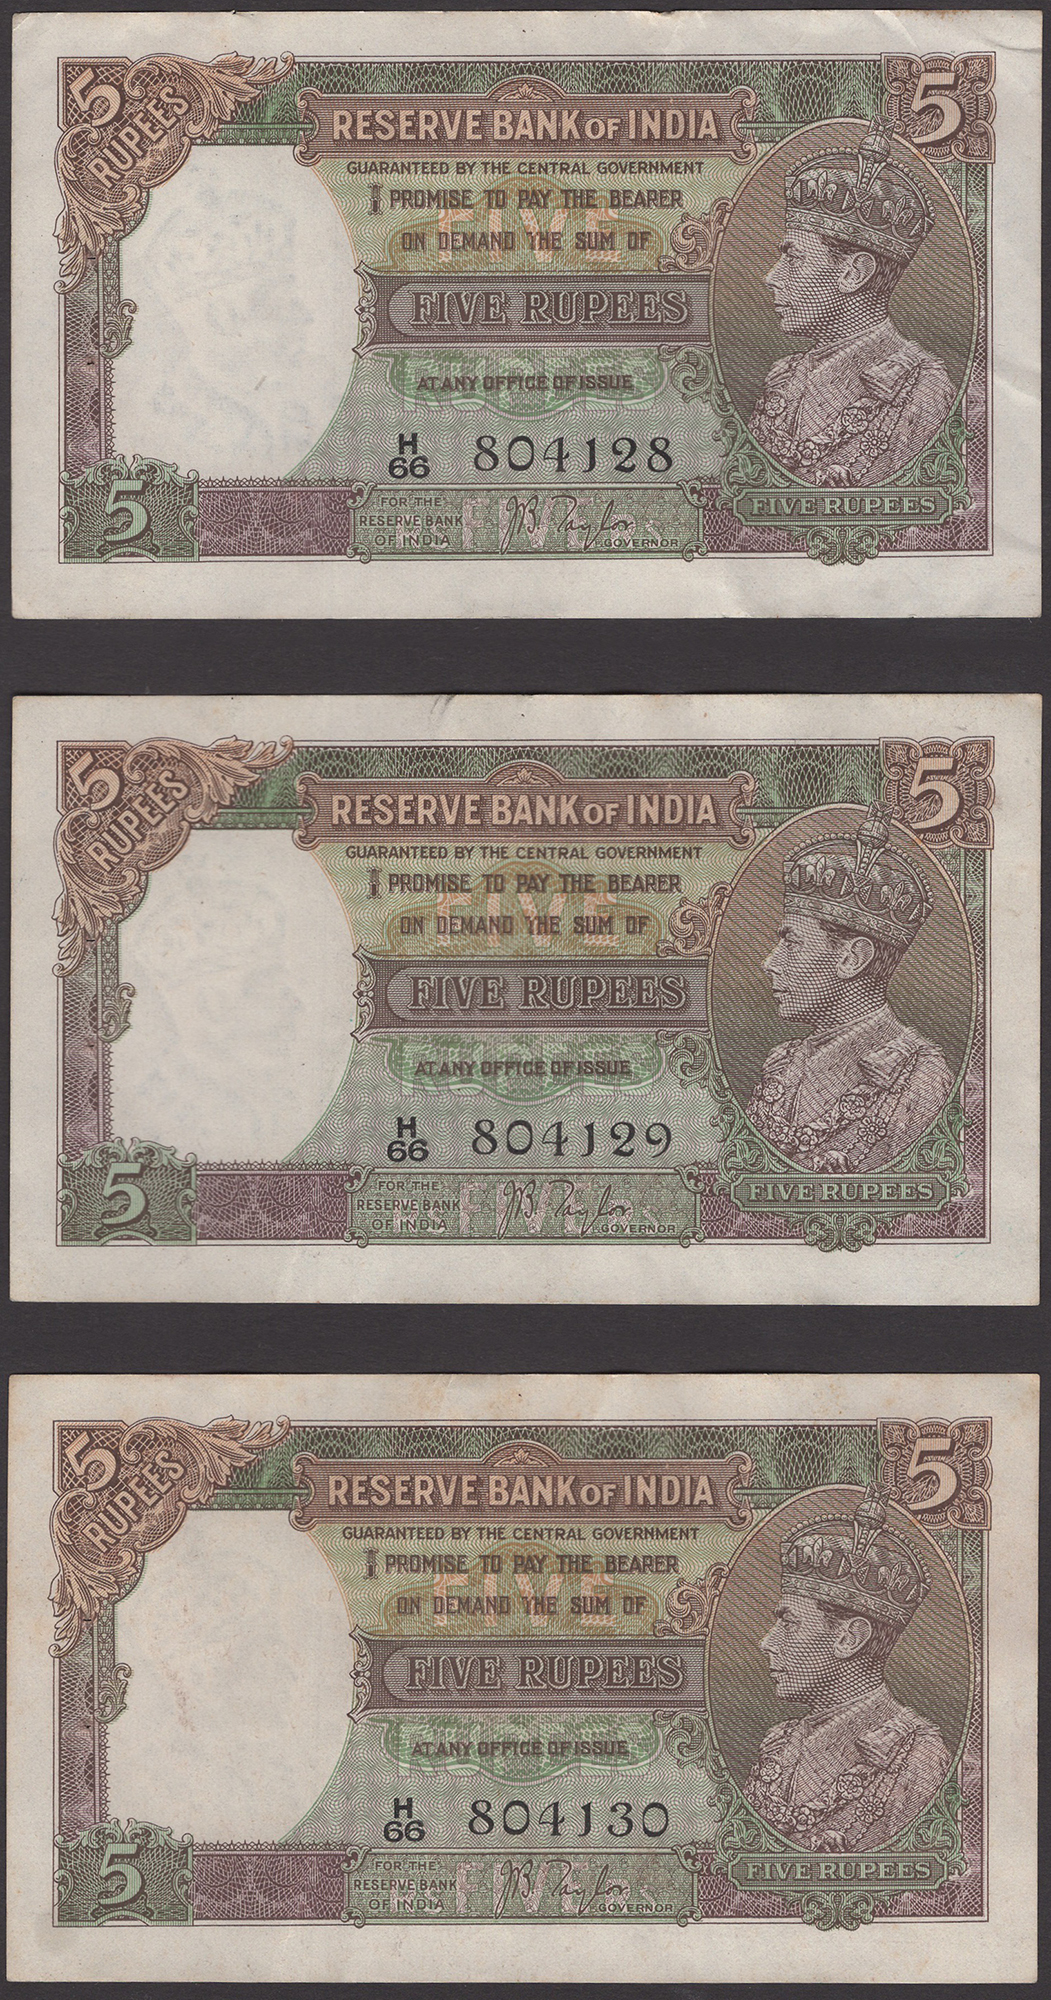 Reserve Bank of India, 5 Rupees (6), ND (1937), consecutive serial numbers H/66 804124-26... - Bild 3 aus 4